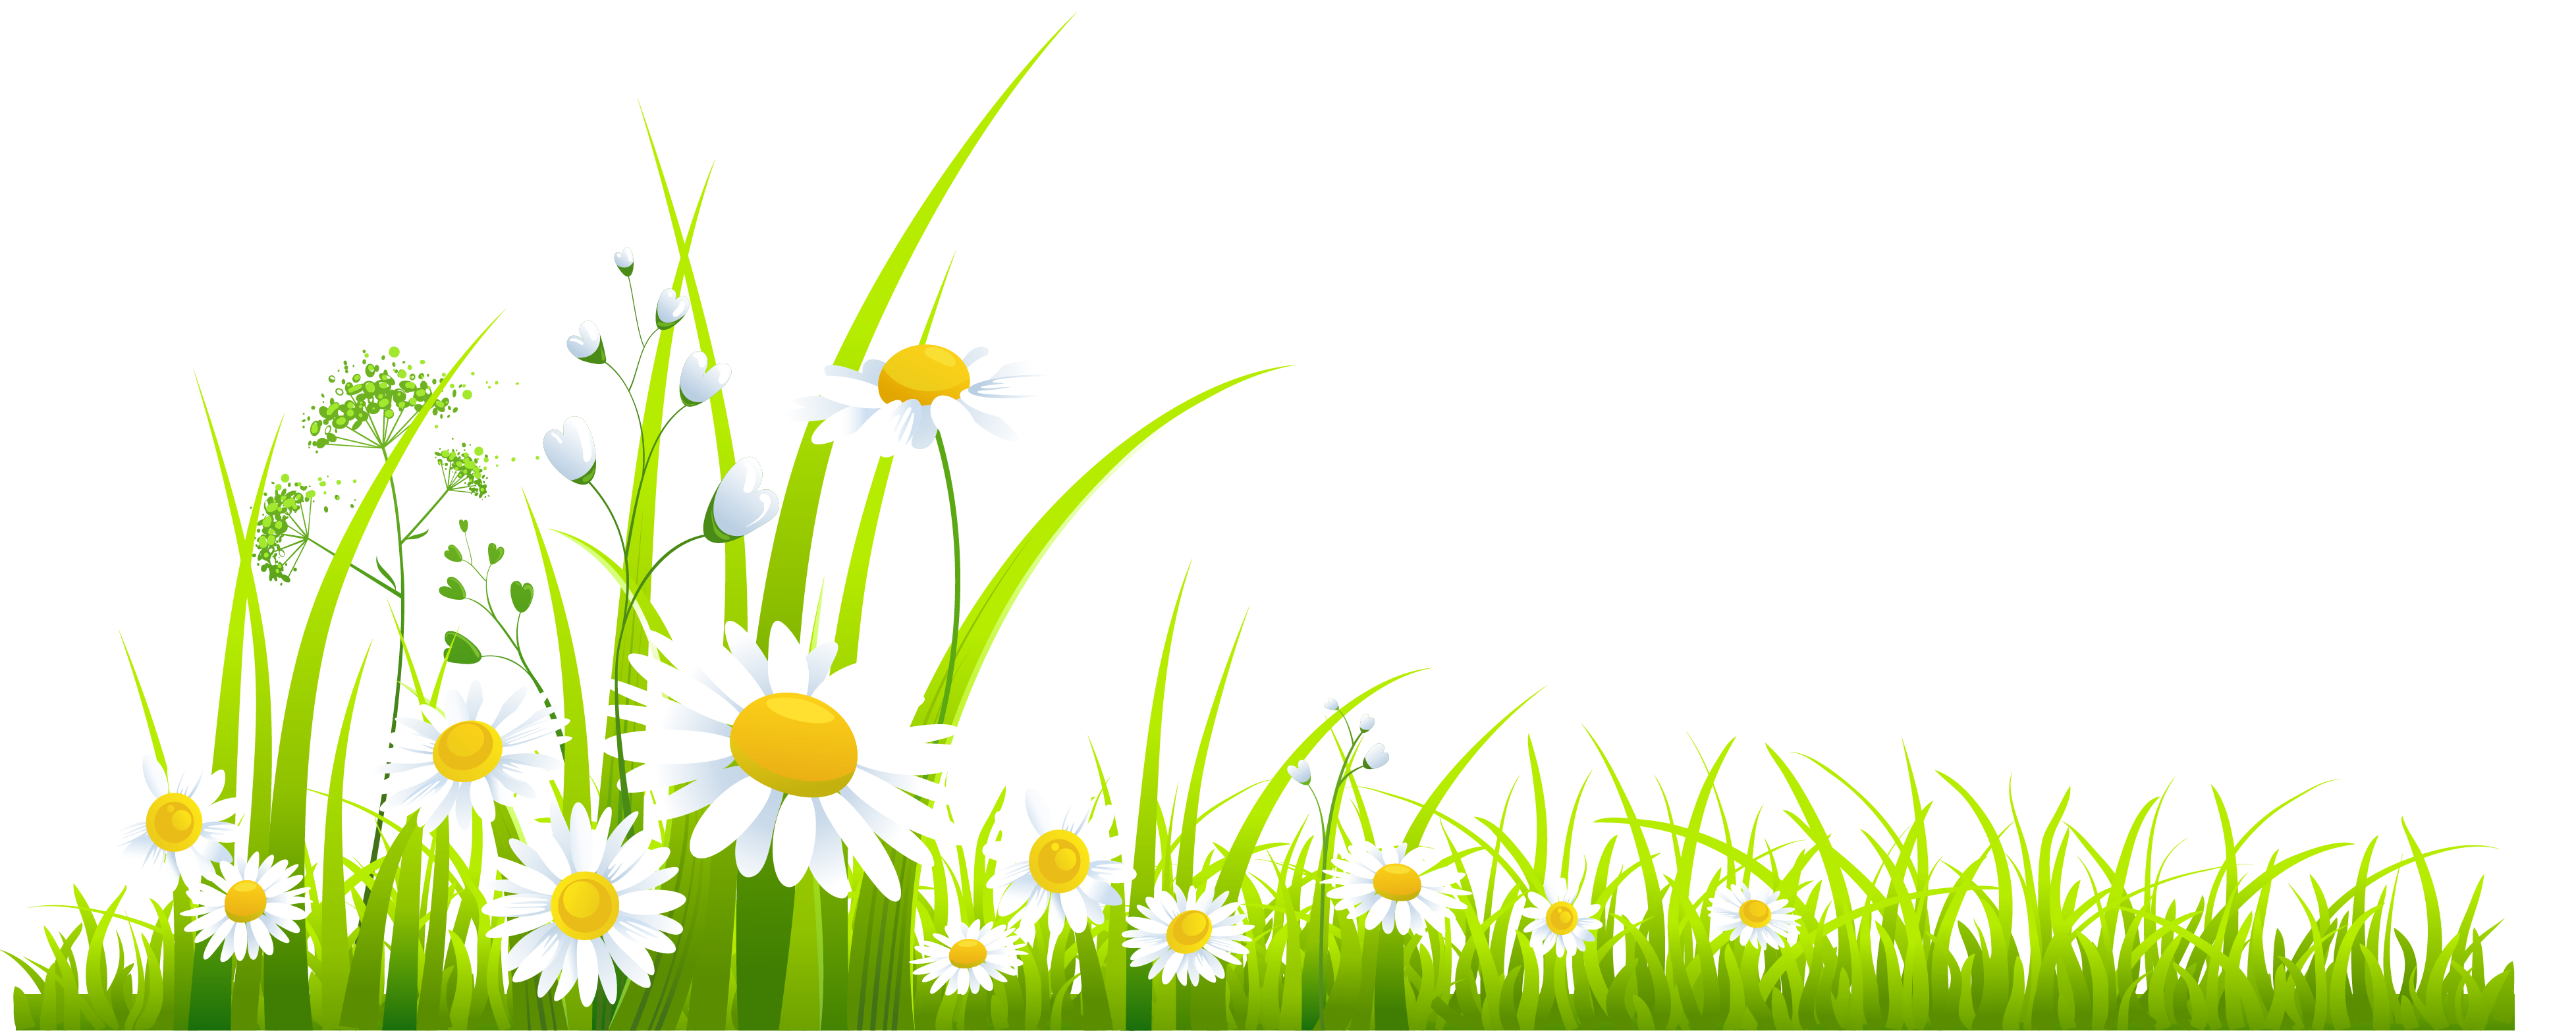 Free spring clip art borders free clipart image 2 